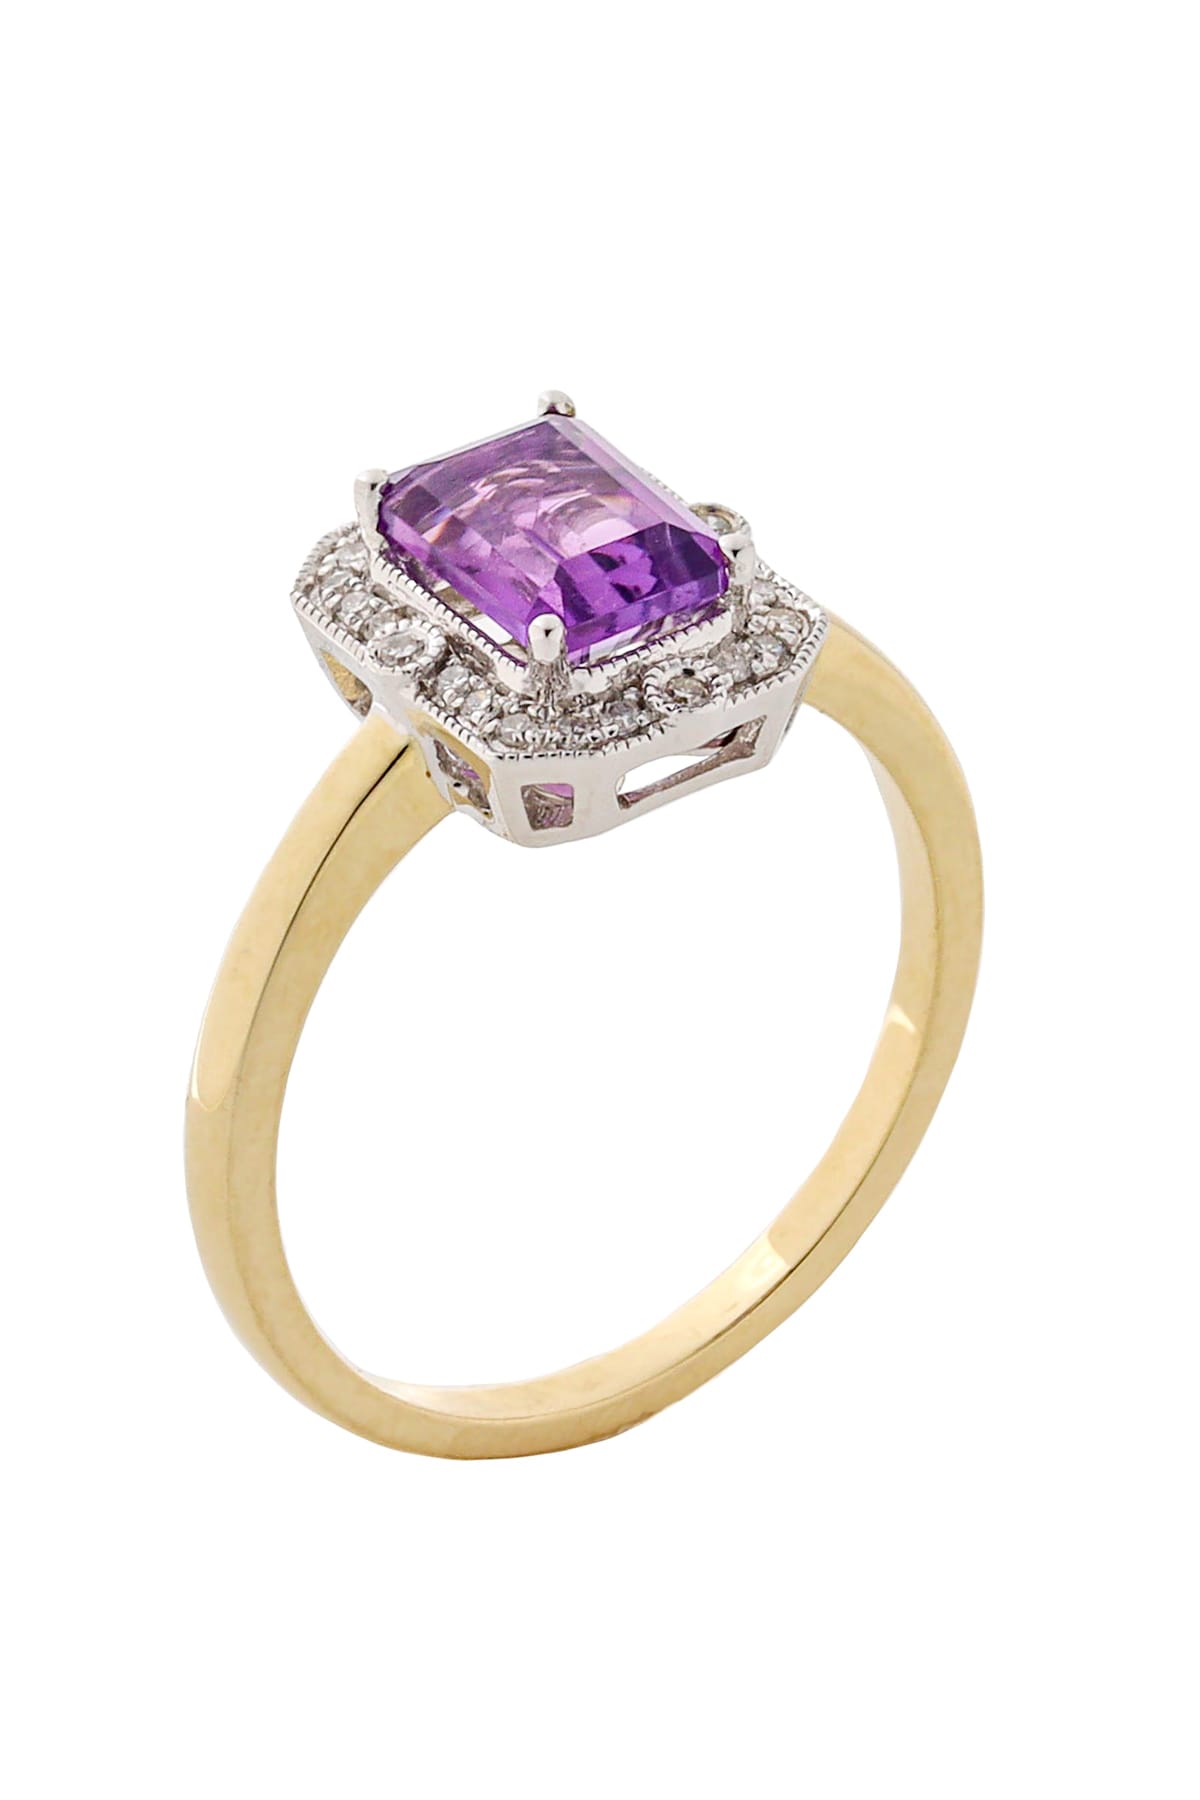 9 Carat Gold Amethyst And Diamond Halo Ring available at LeGassick Diamonds and Jewellery Gold Coast, Australia.